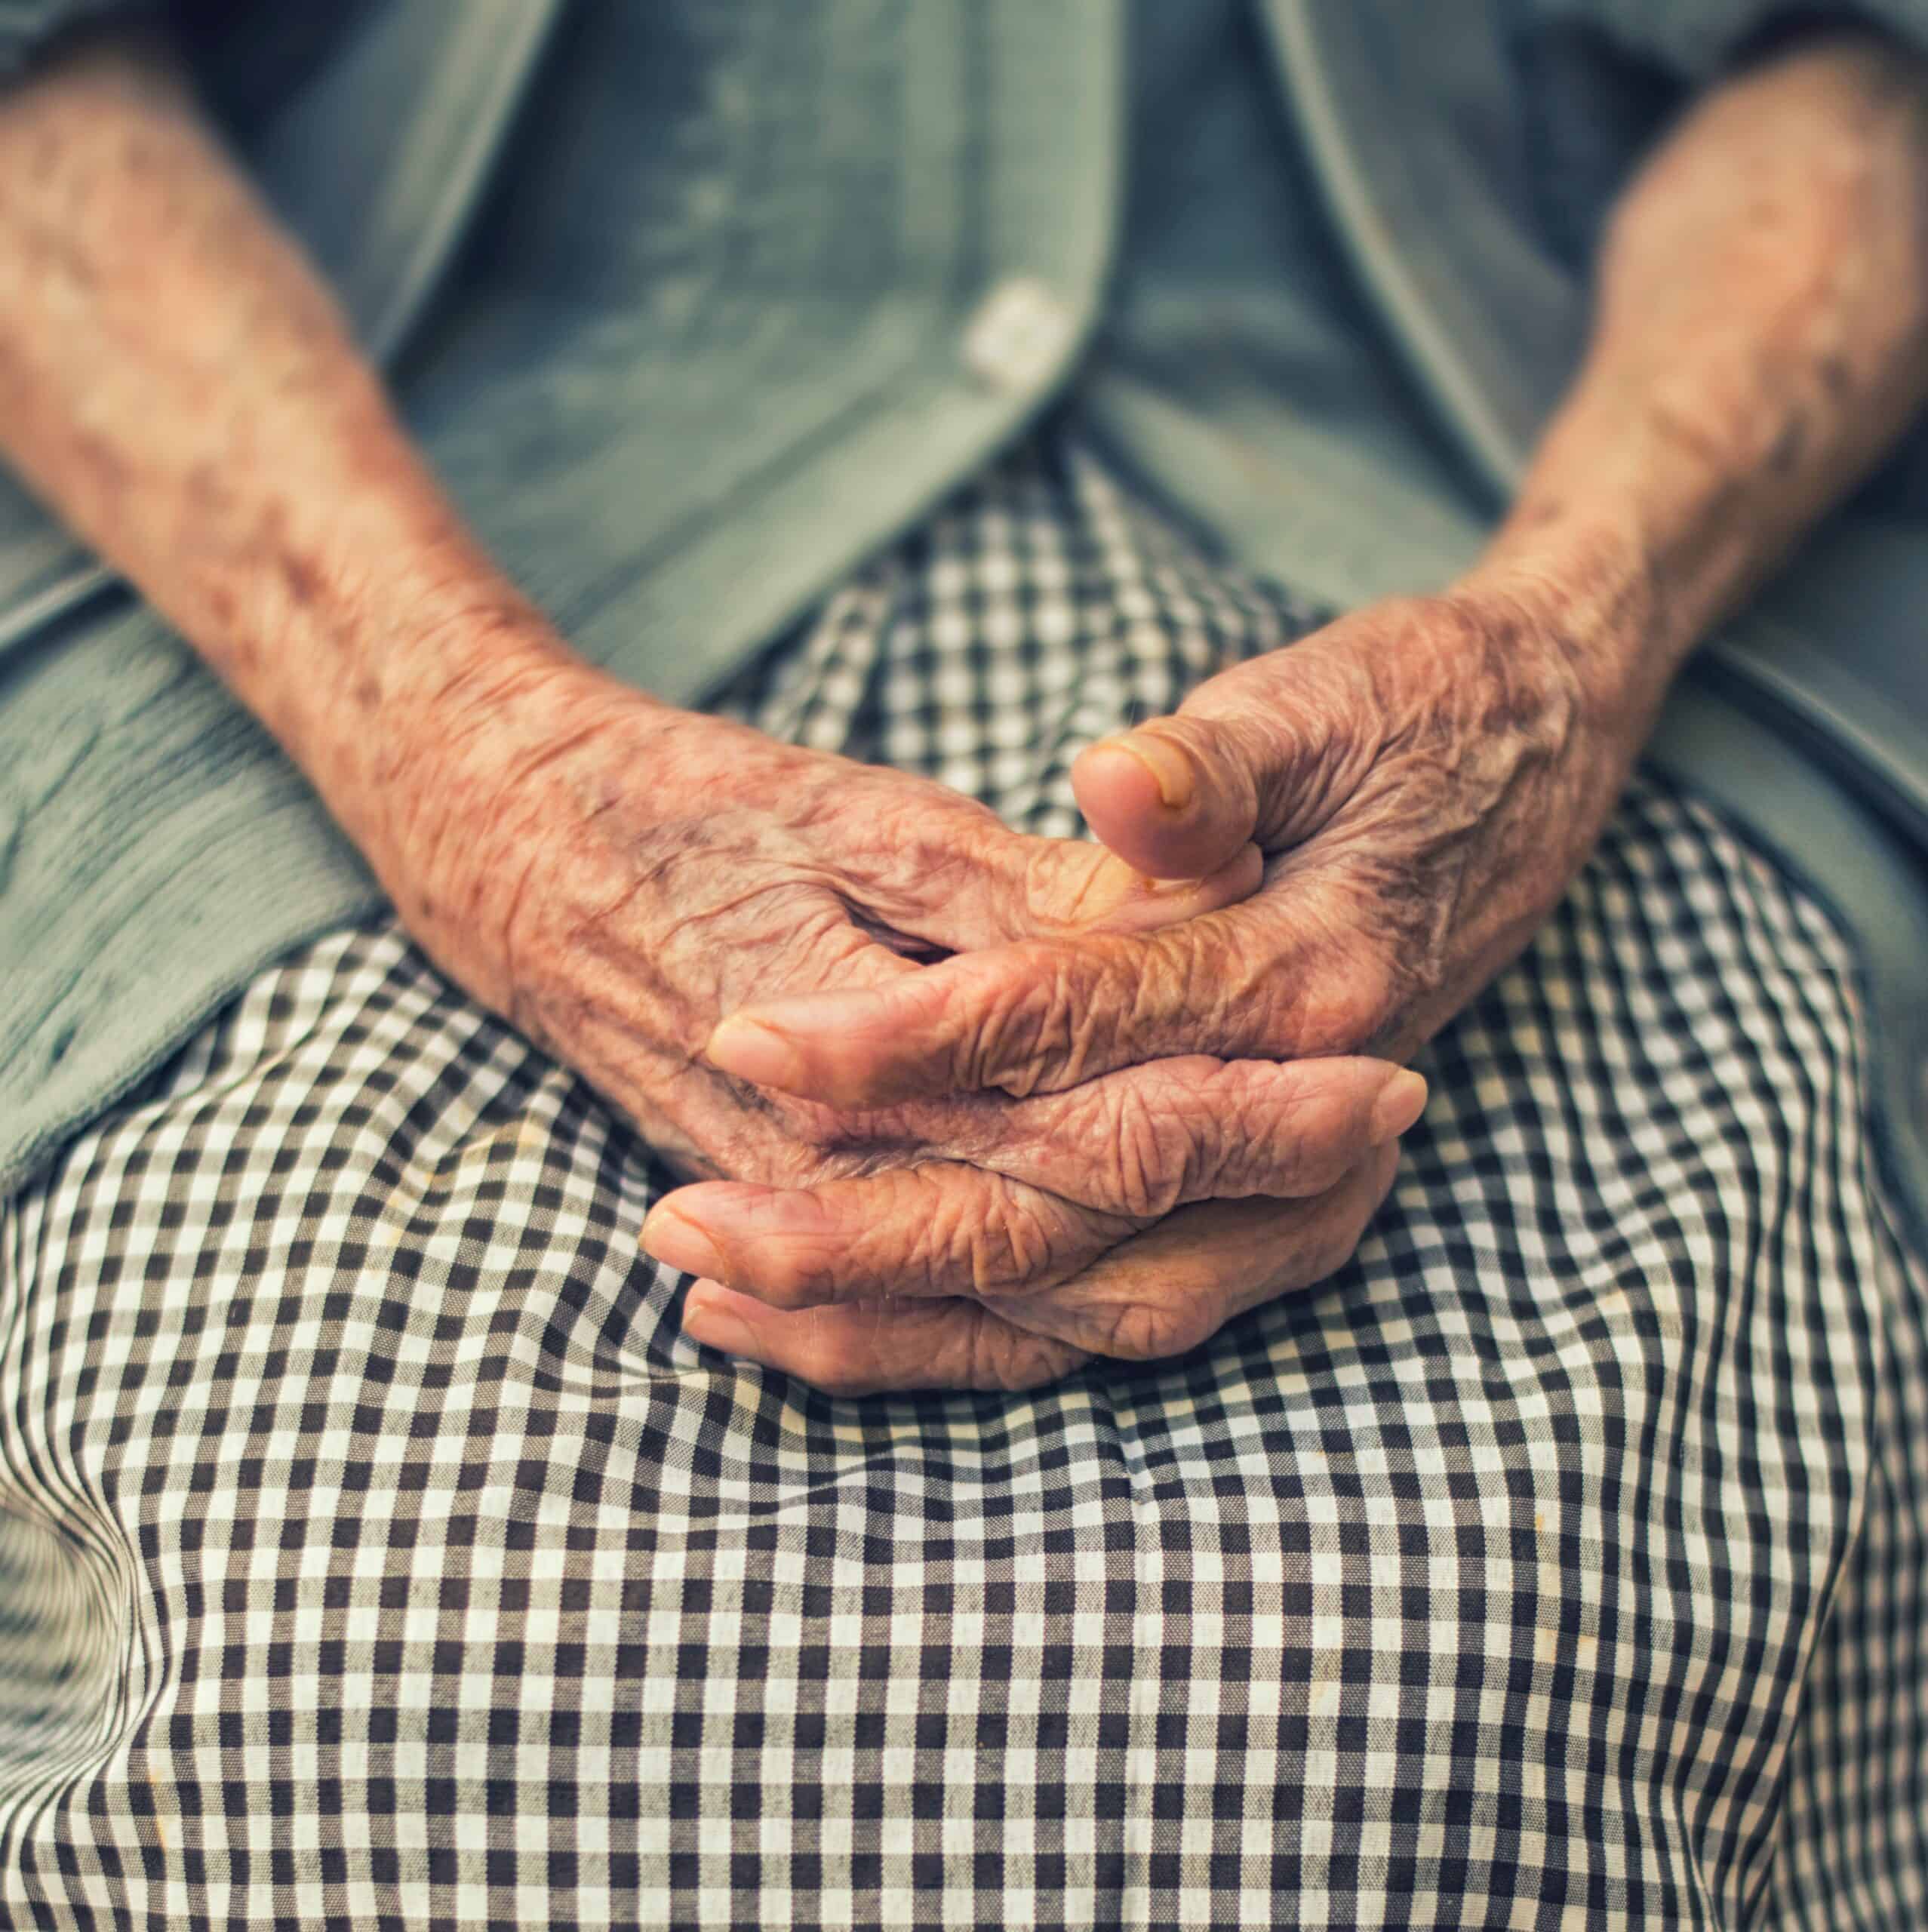 An older lady with frailty hold her hands together